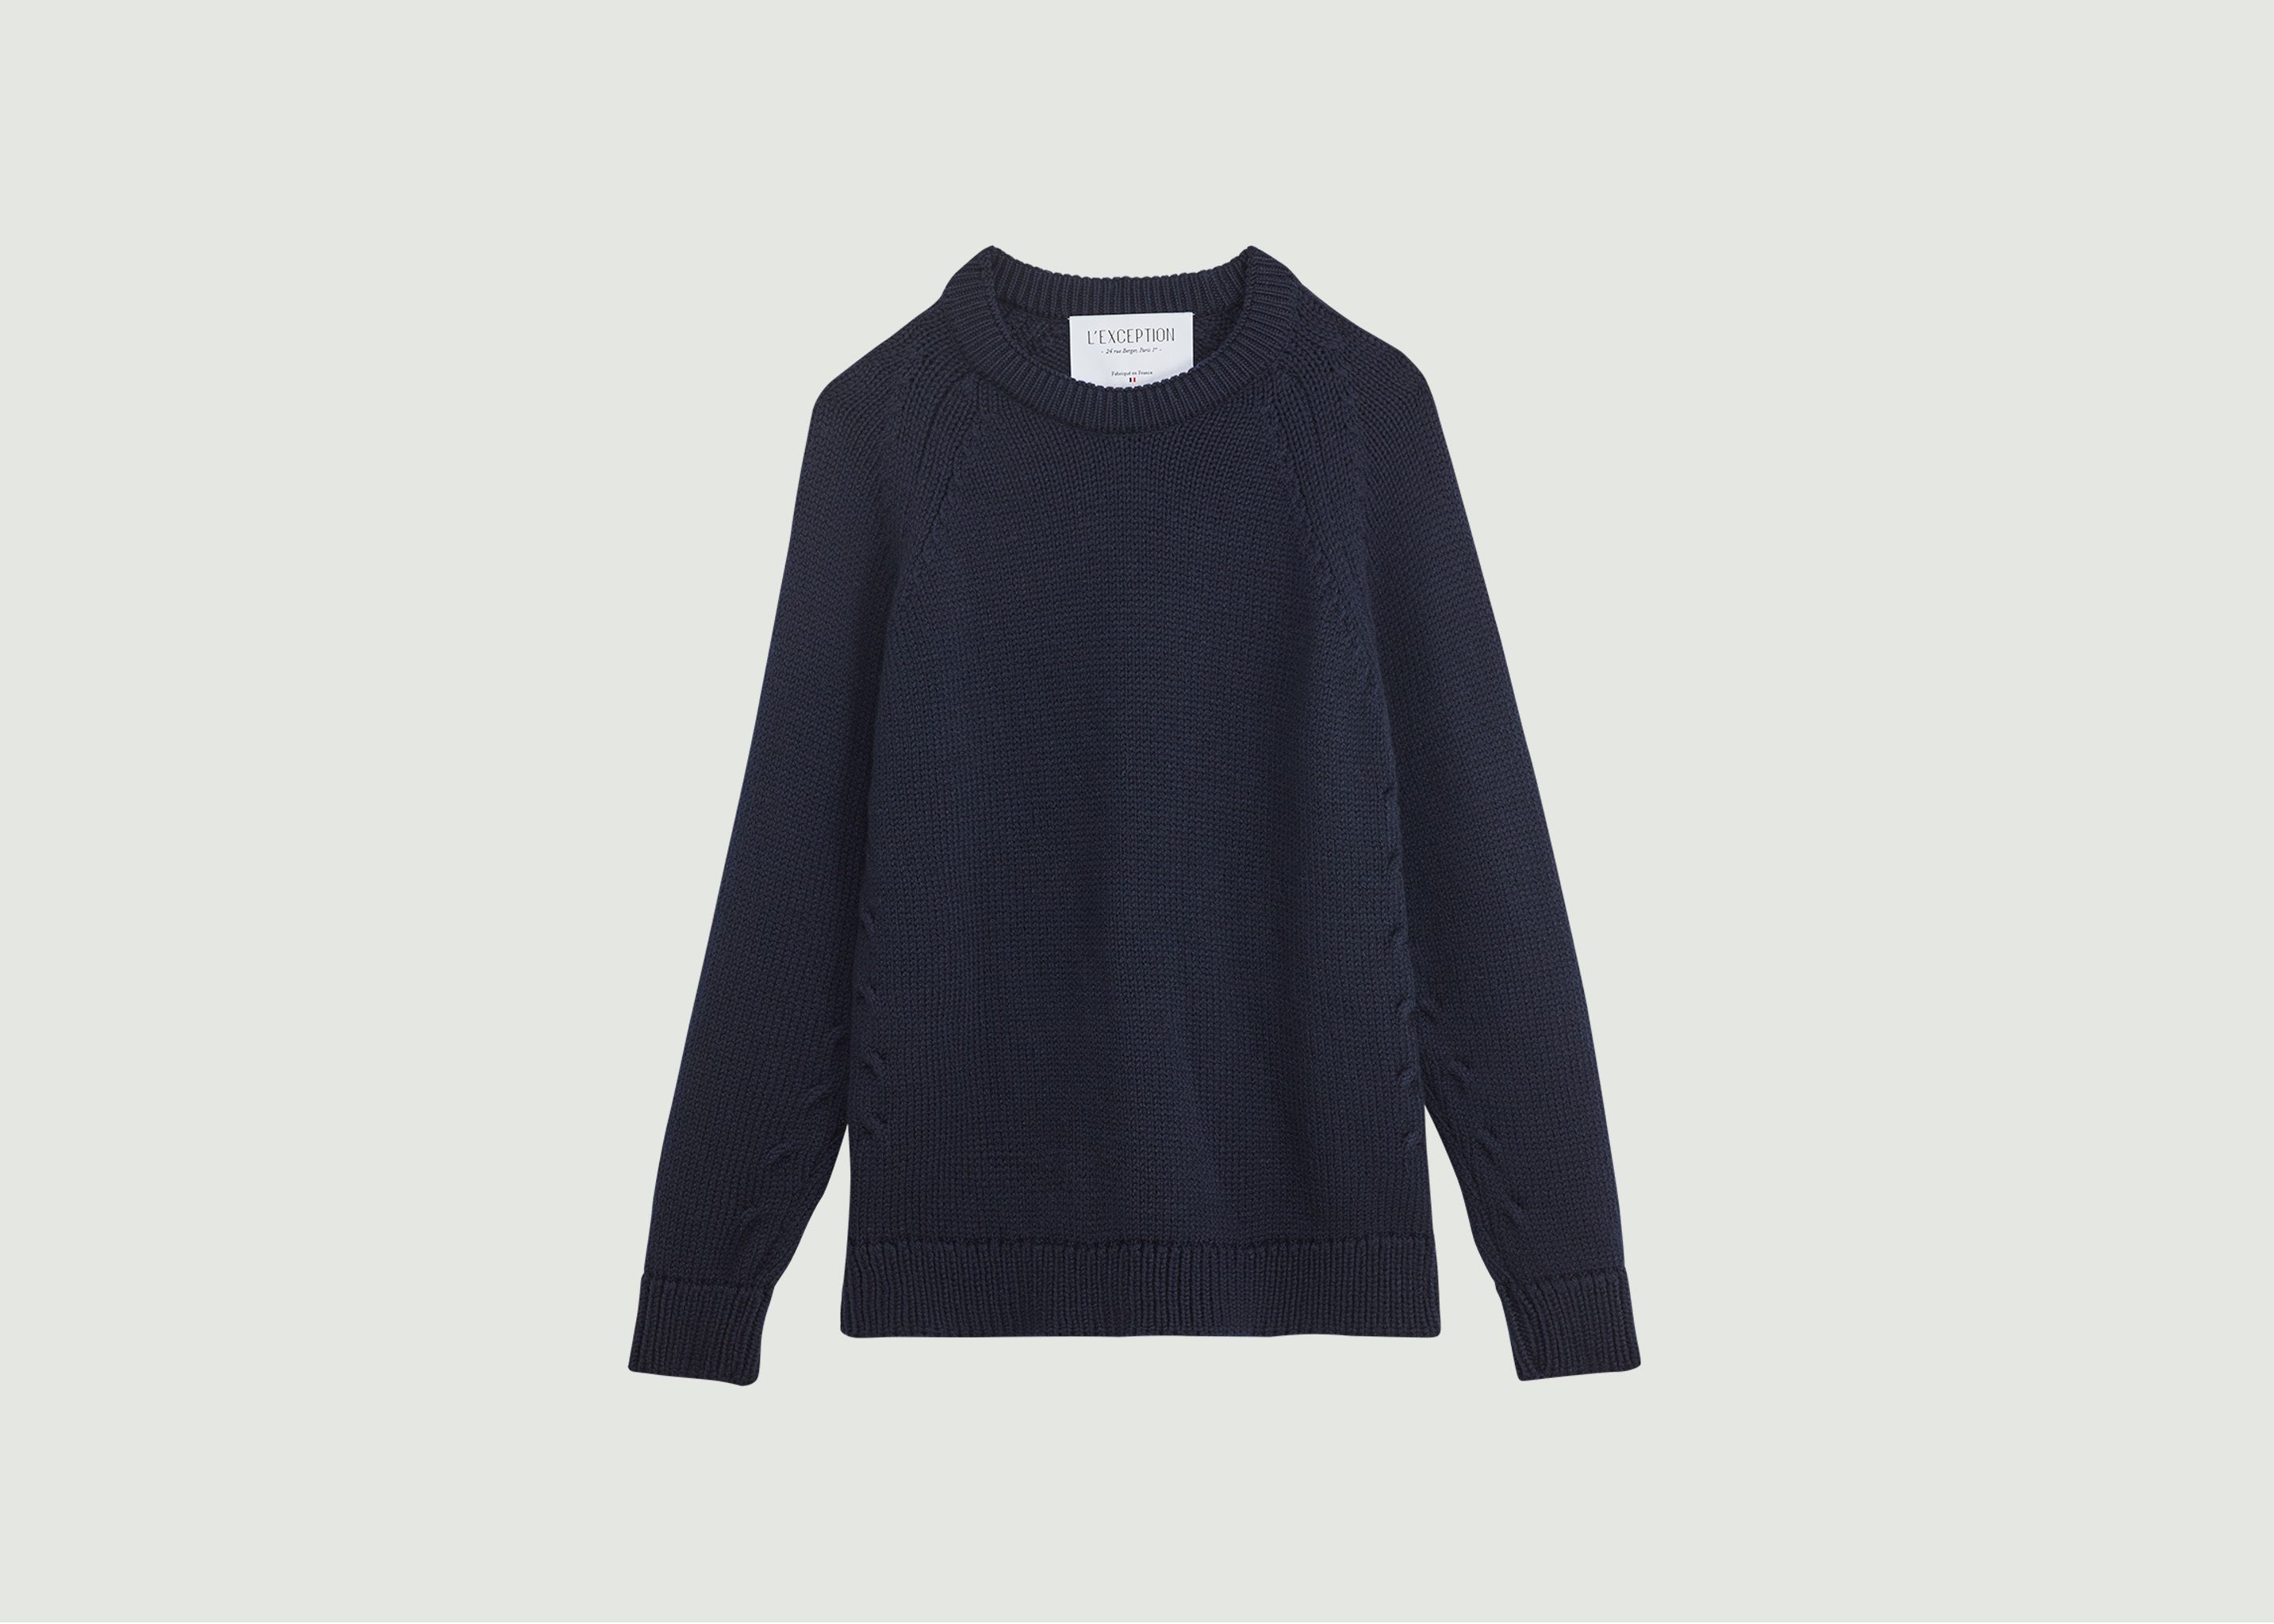 Italian wool jumper made in France - L'Exception Paris